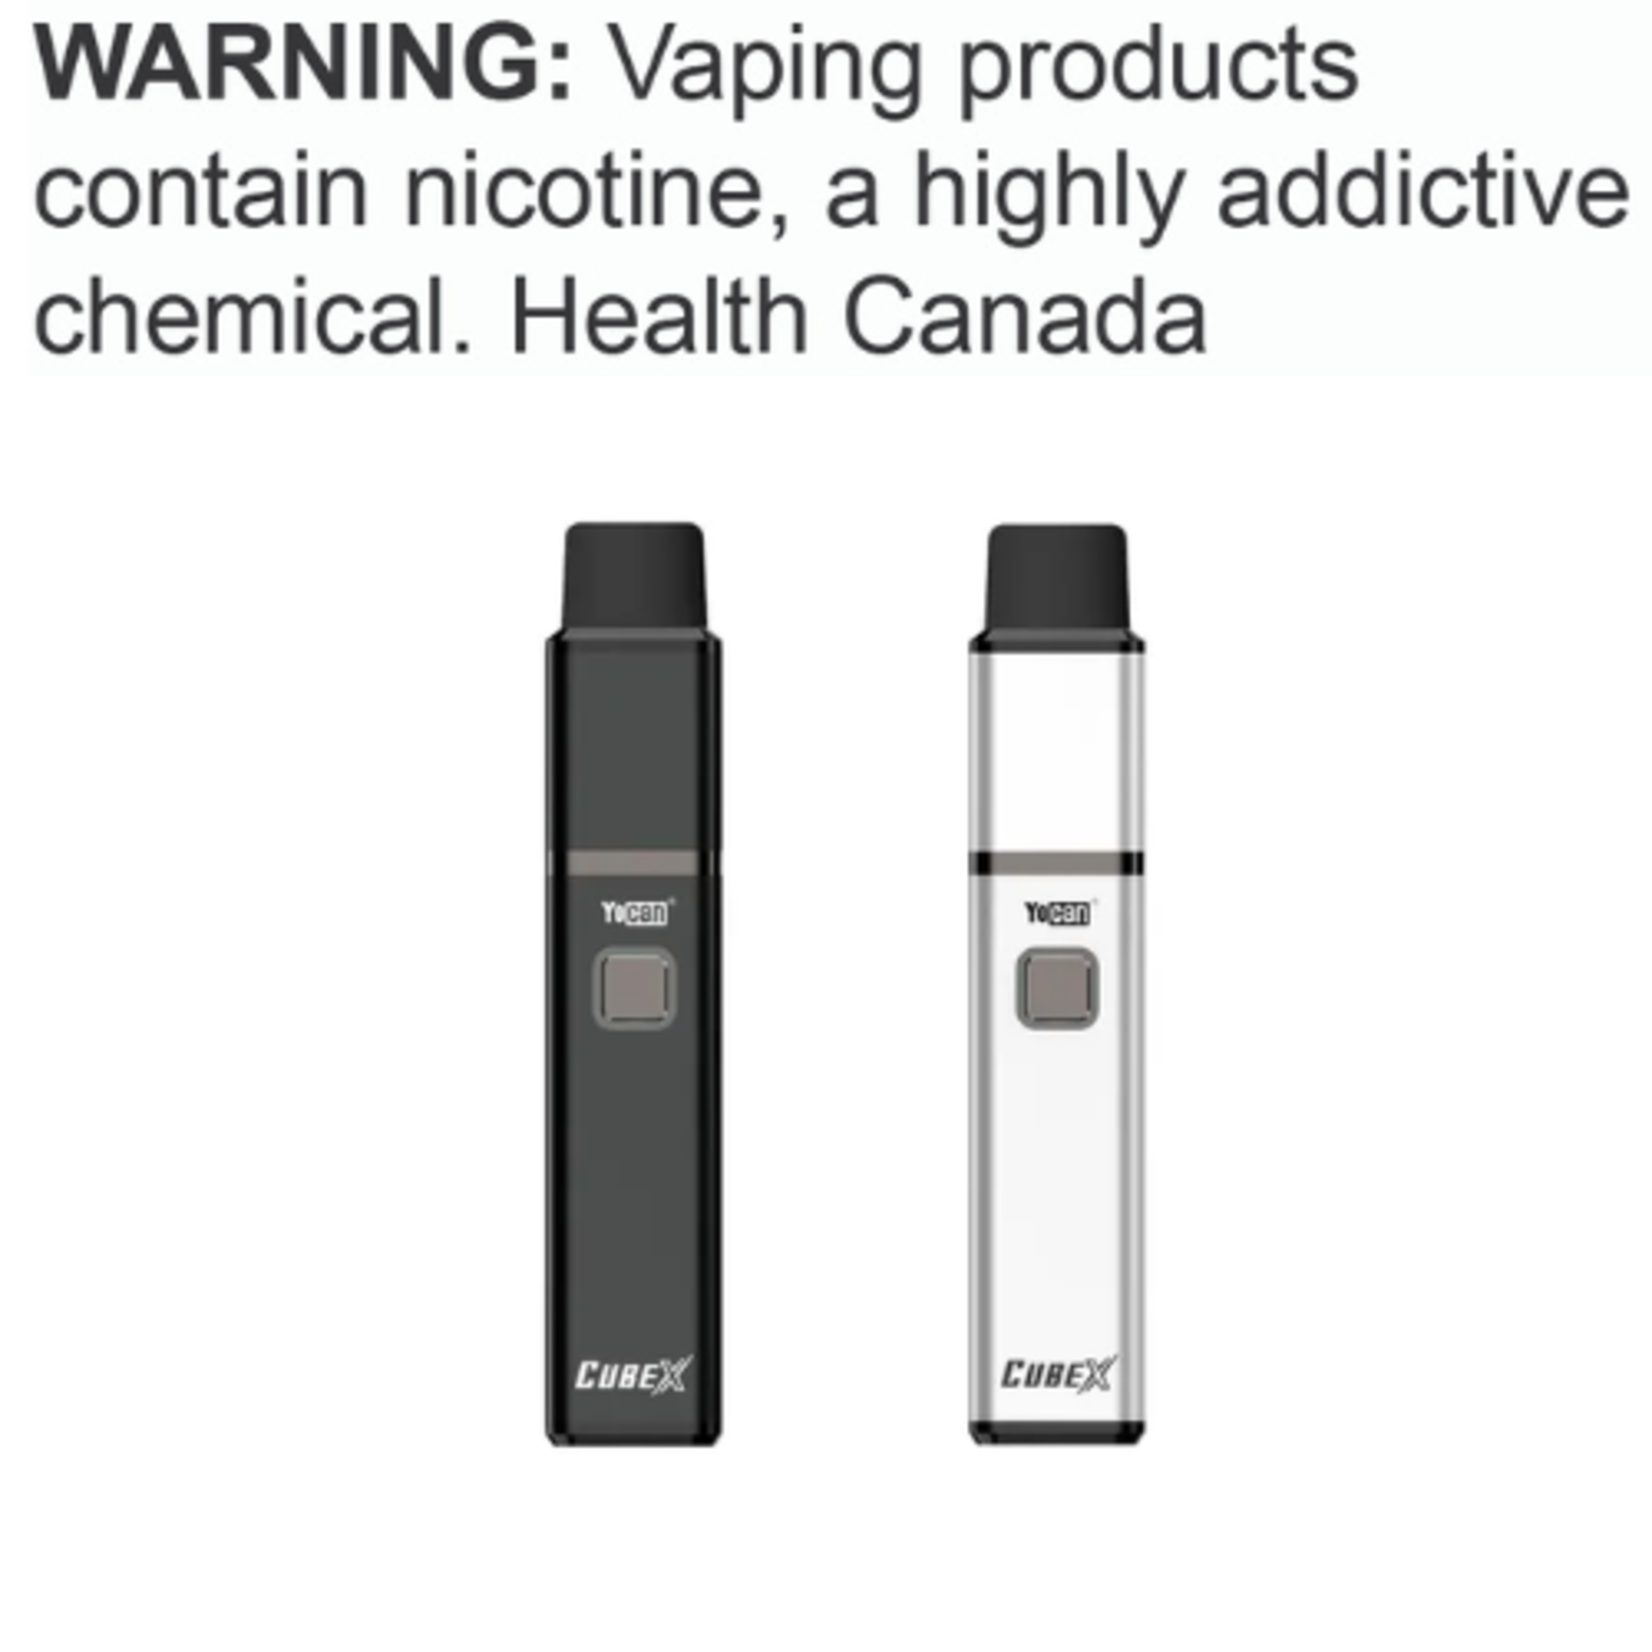 Yocan Yocan CubeX Concentrate Kit